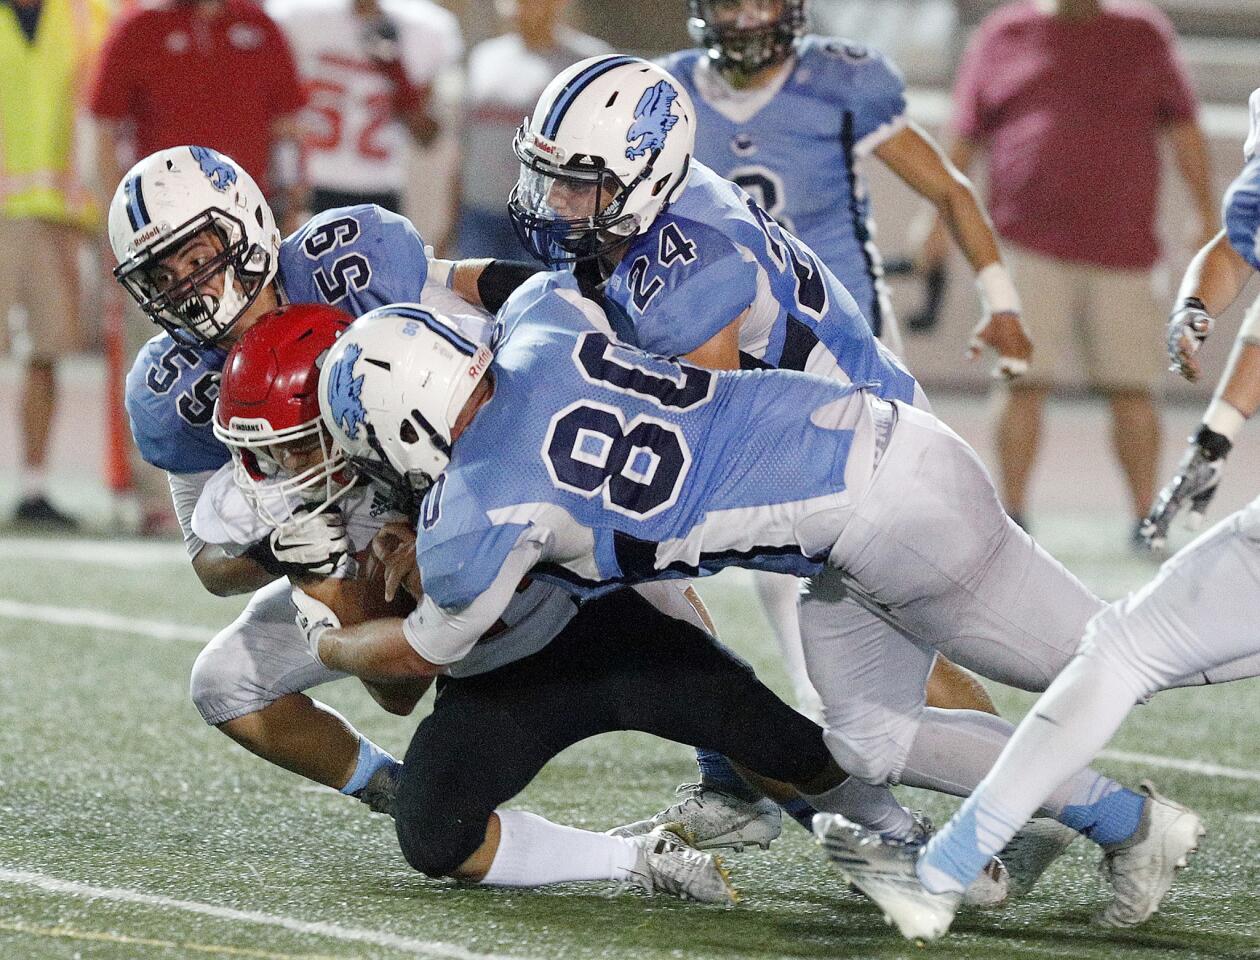 Photo Gallery: Crescenta Valley vs. Burroughs in Pacific League football